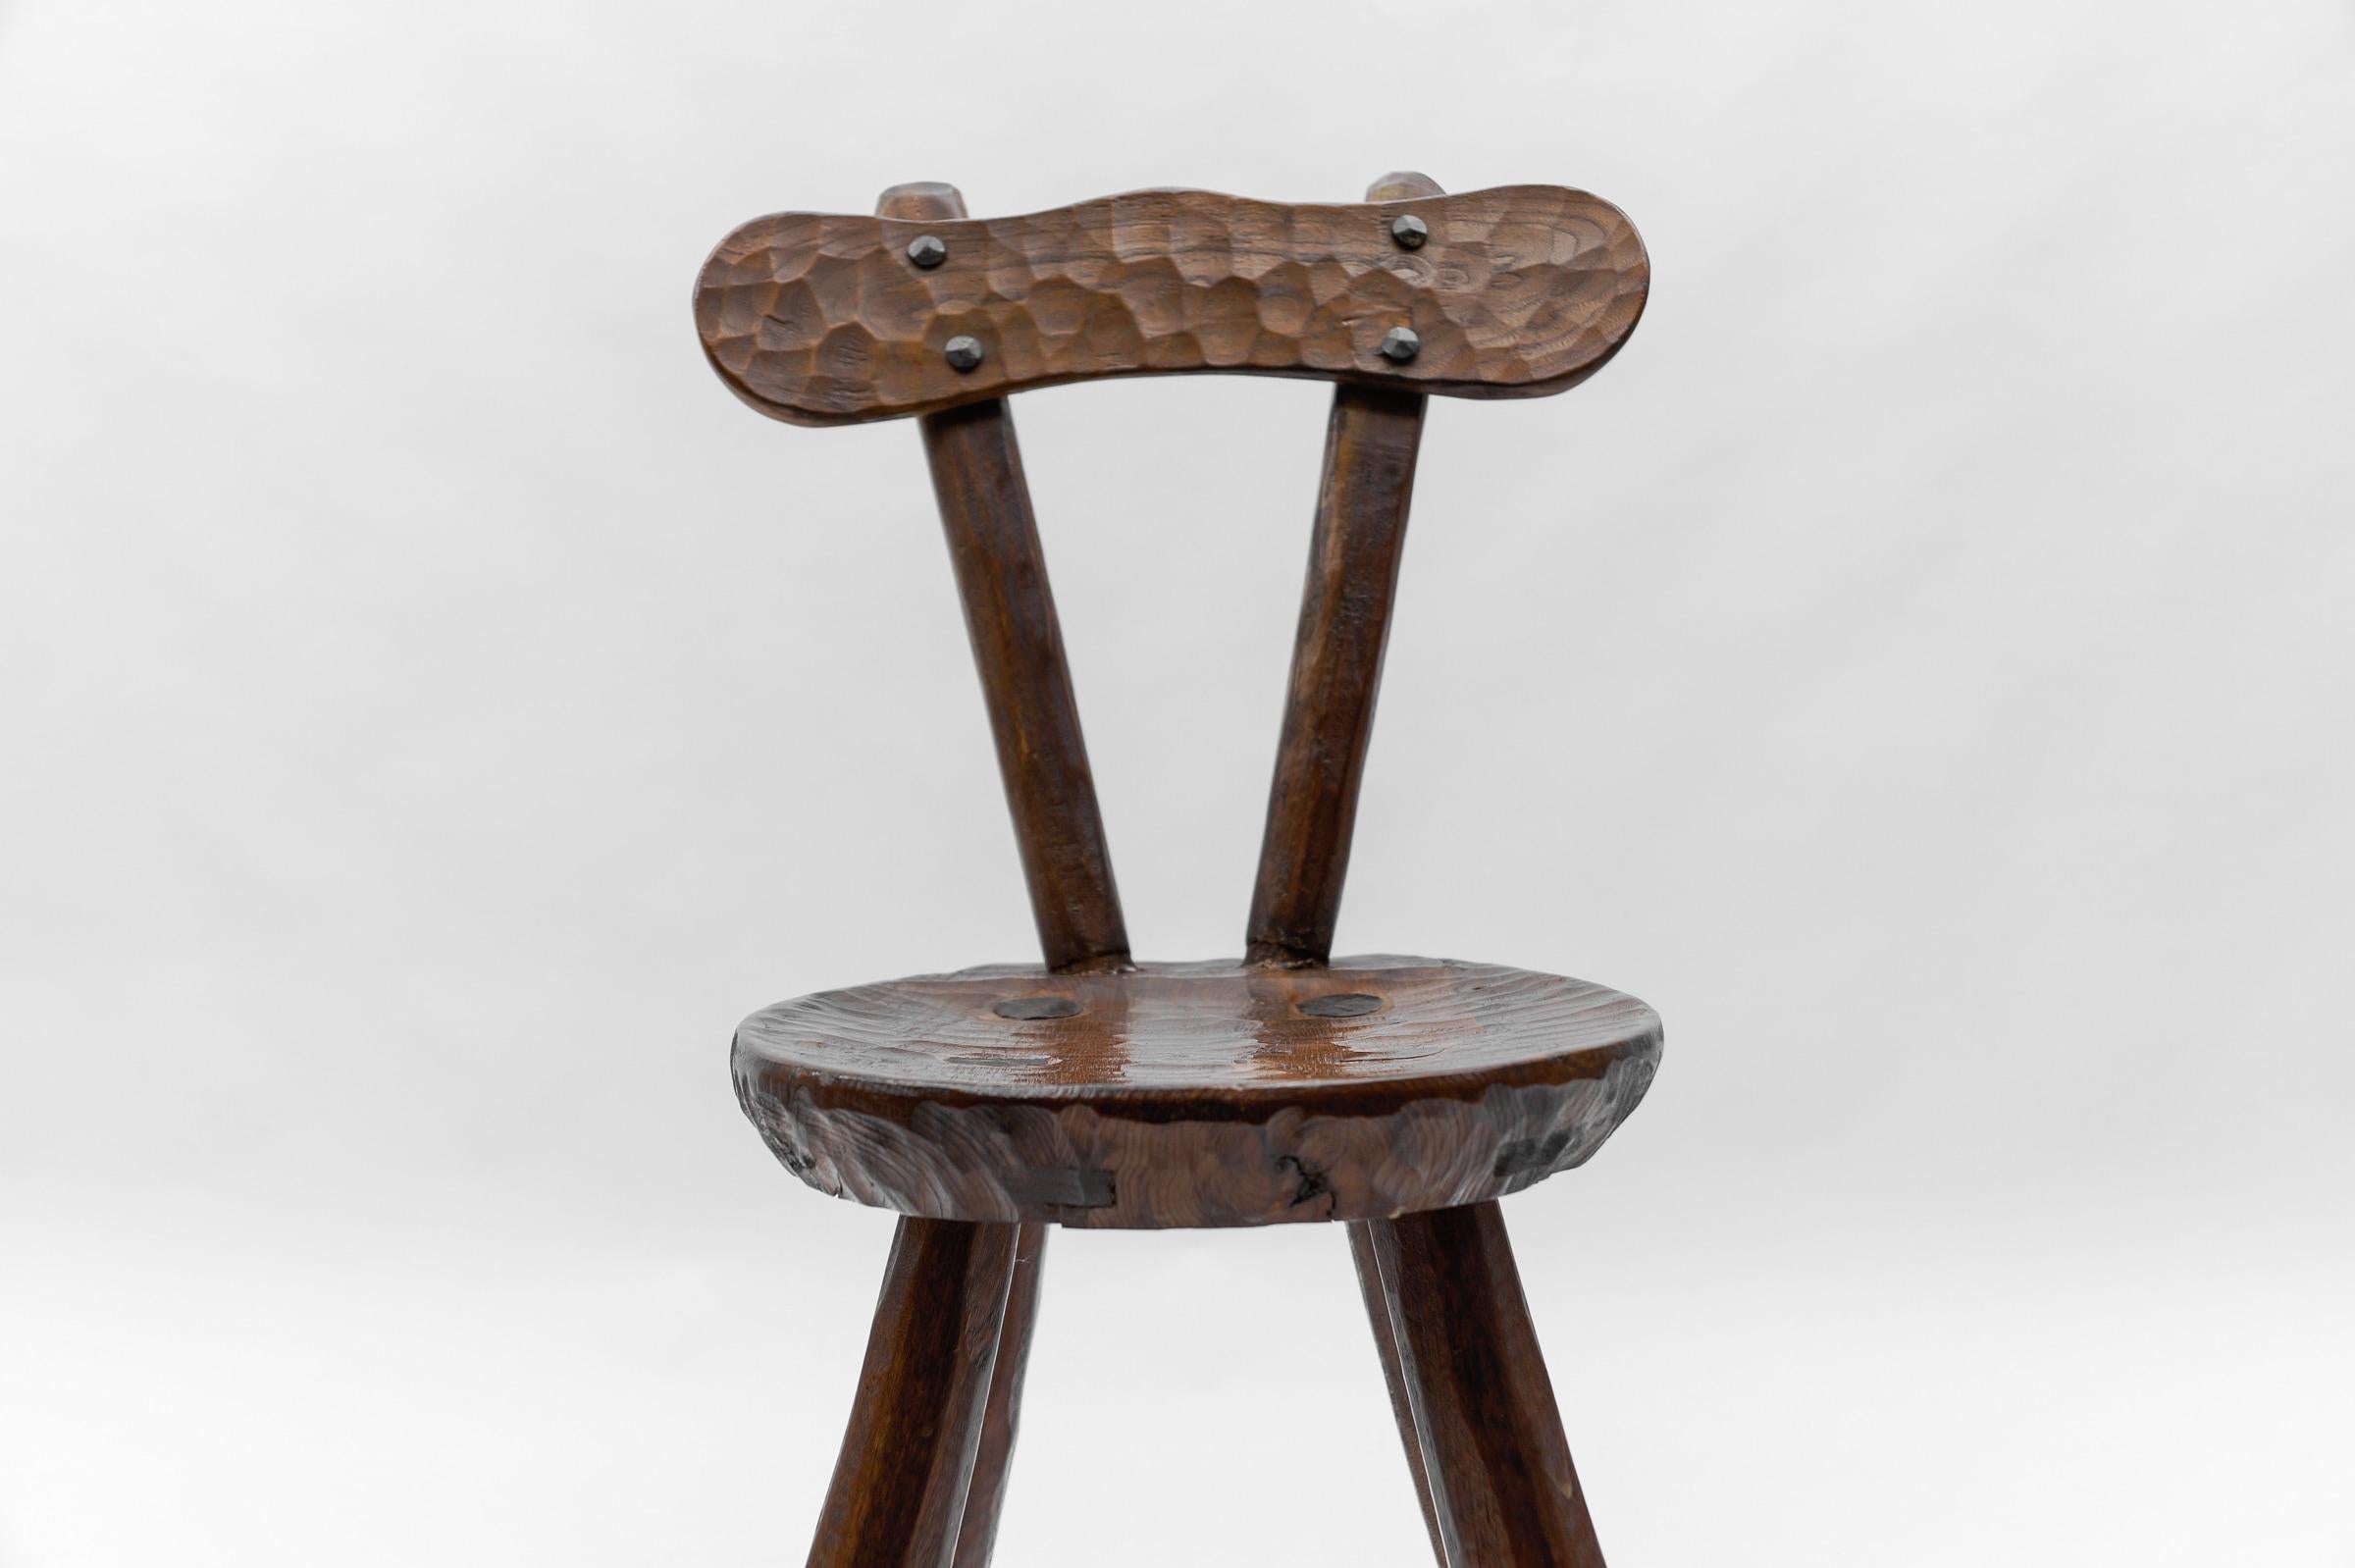 Rustic French Provincial Sculptured Chair in the Style of Alexandre Noll, 1960s For Sale 1